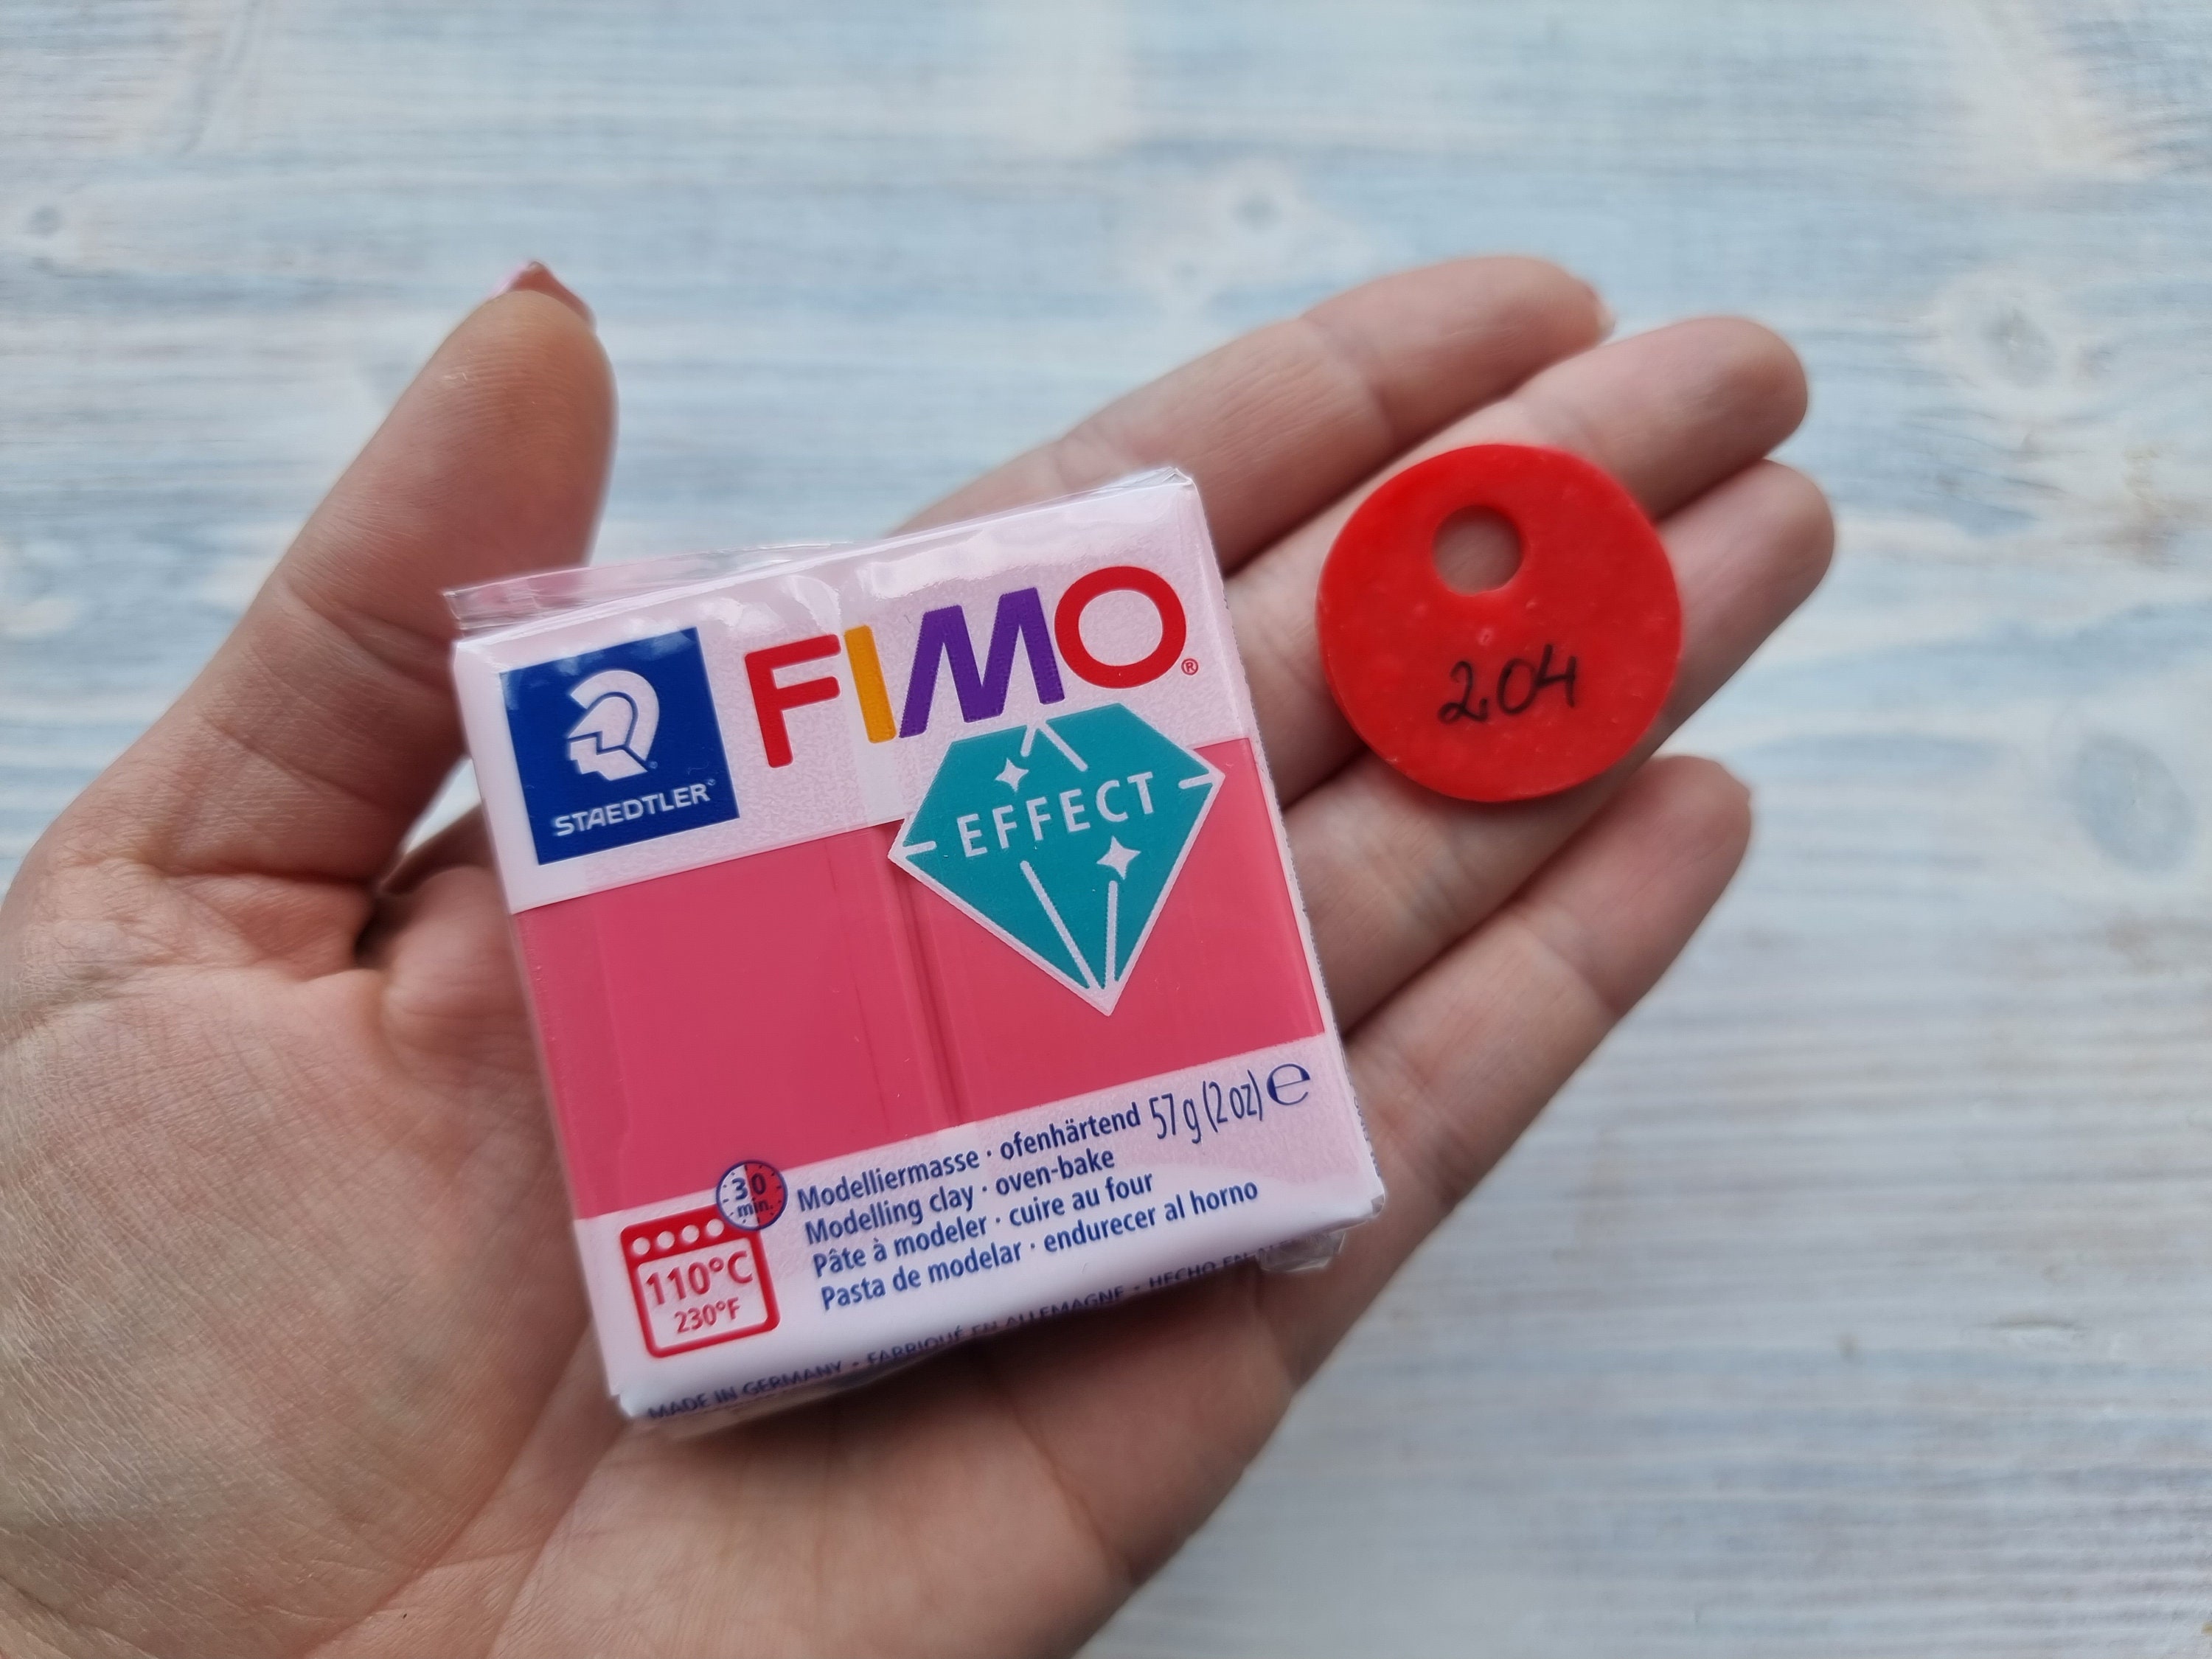 Fimo Effect Translucent Serie Polymer Clay, Red translucent, Nr